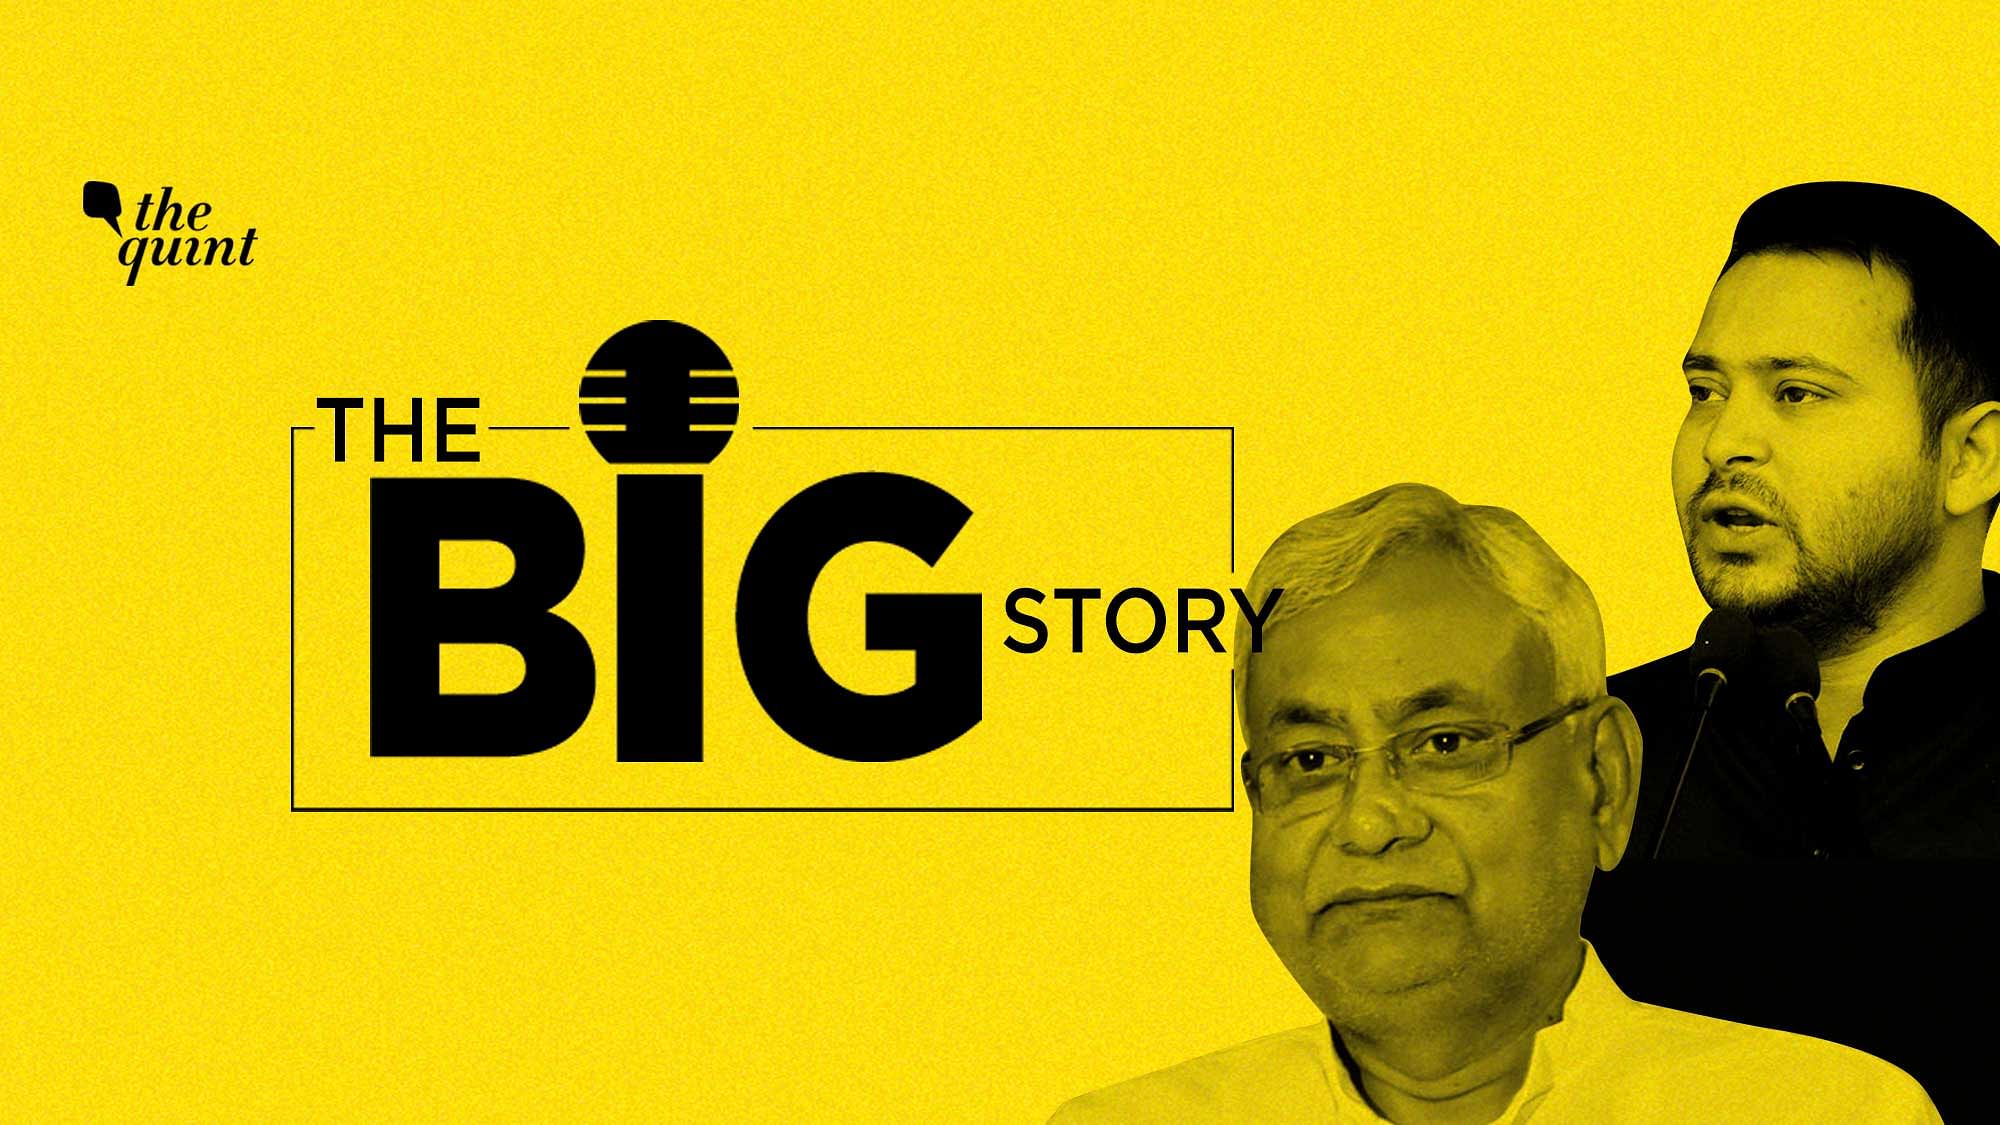 According to predictions from the CVoter opinion poll, which surveyed 2,100 respondents across the state, Nitish Kumar who has been in power for 15 years, is looking at a massive anti-incumbency.